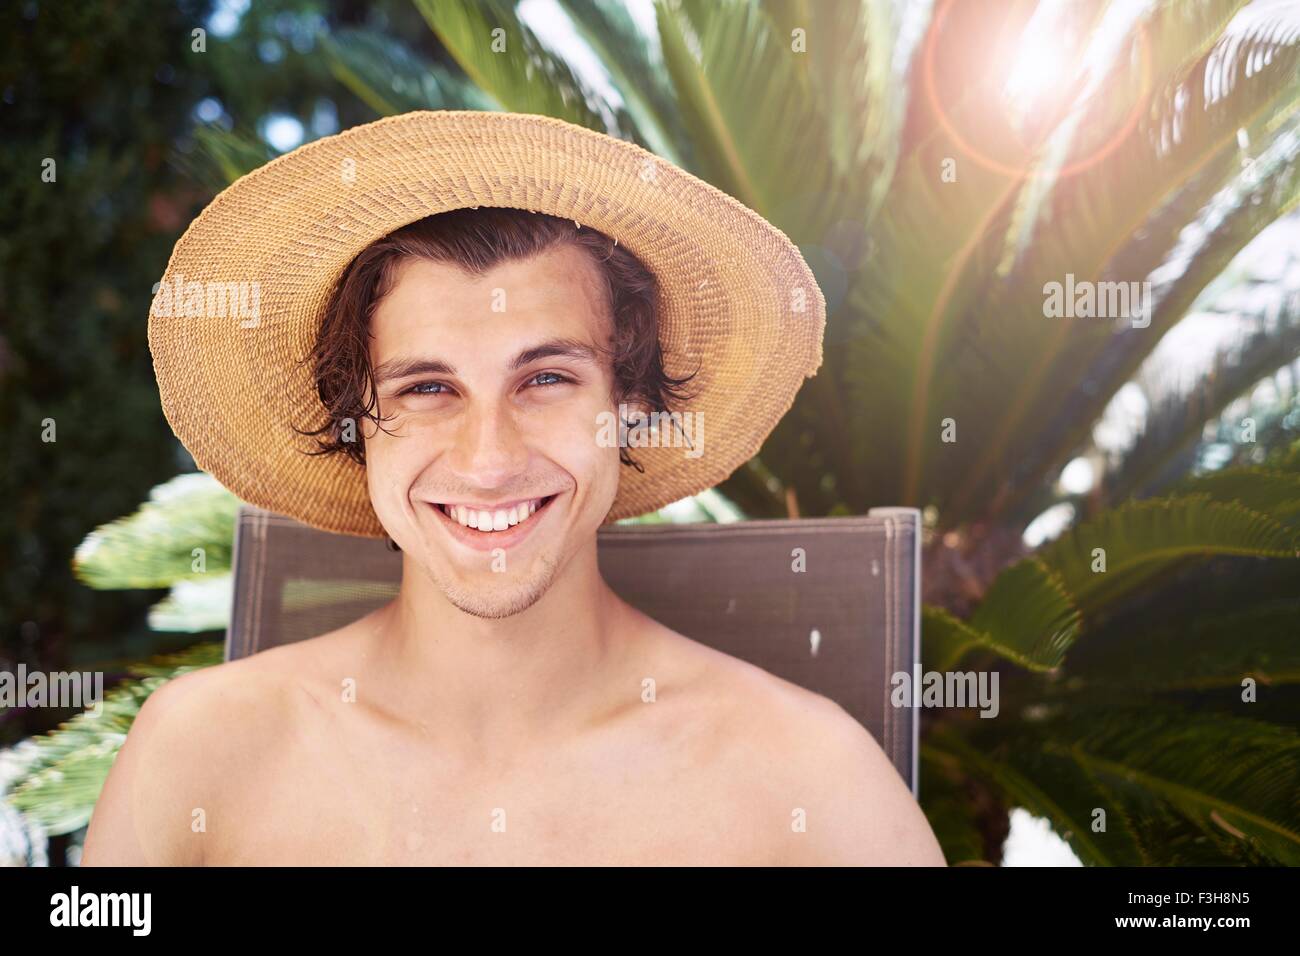 Portrait of smiling young man wearing sunhat Stock Photo